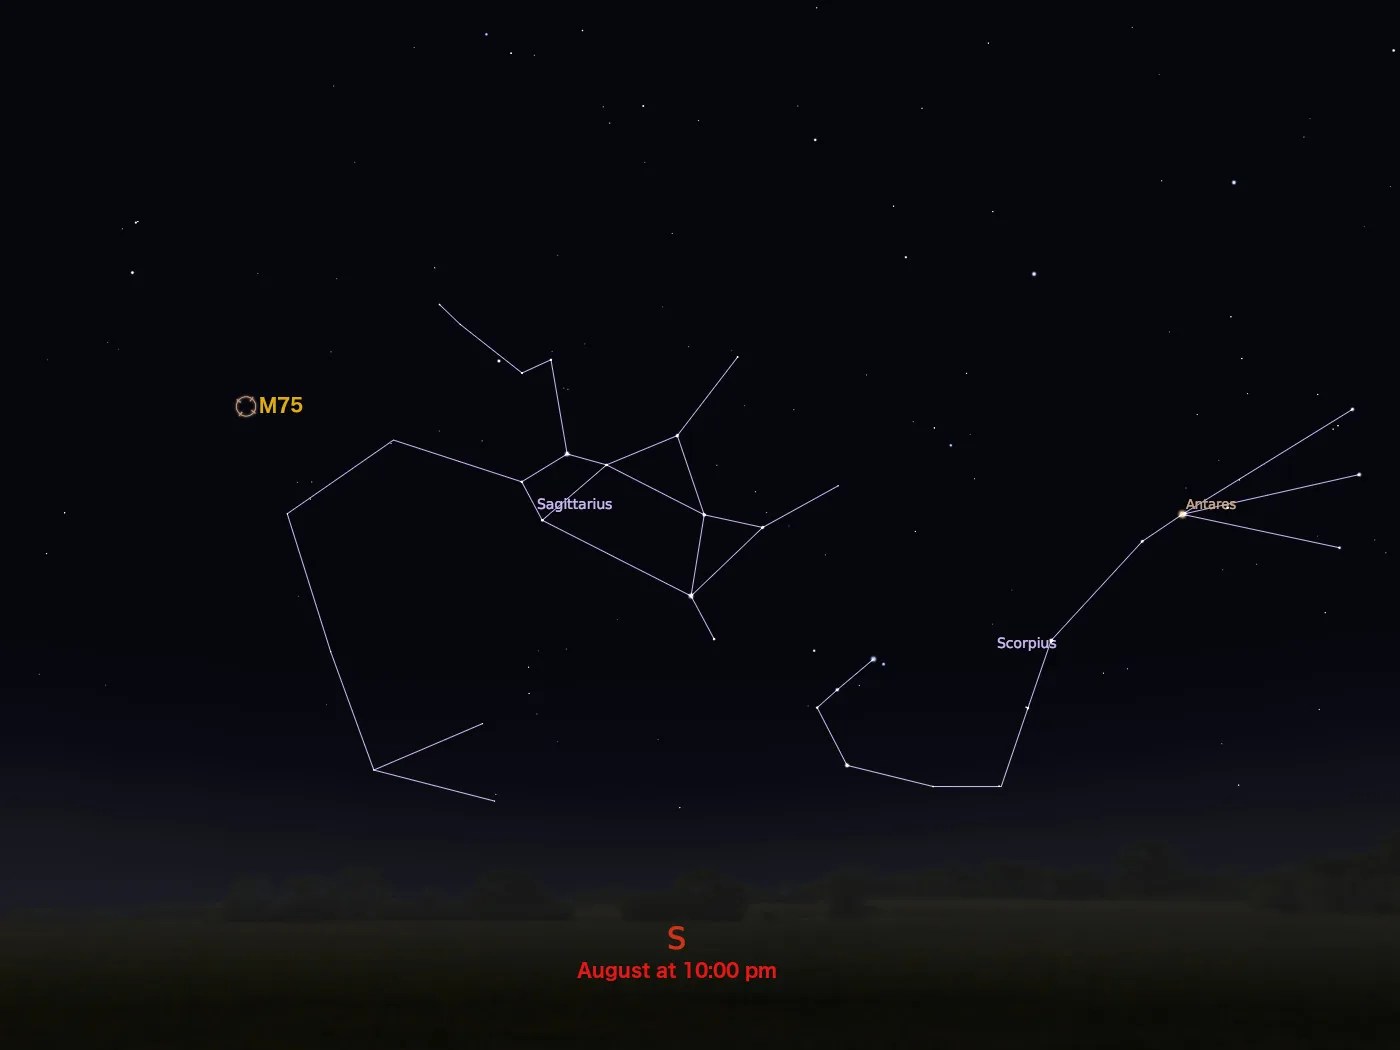 star chart showing location in night sky of M75